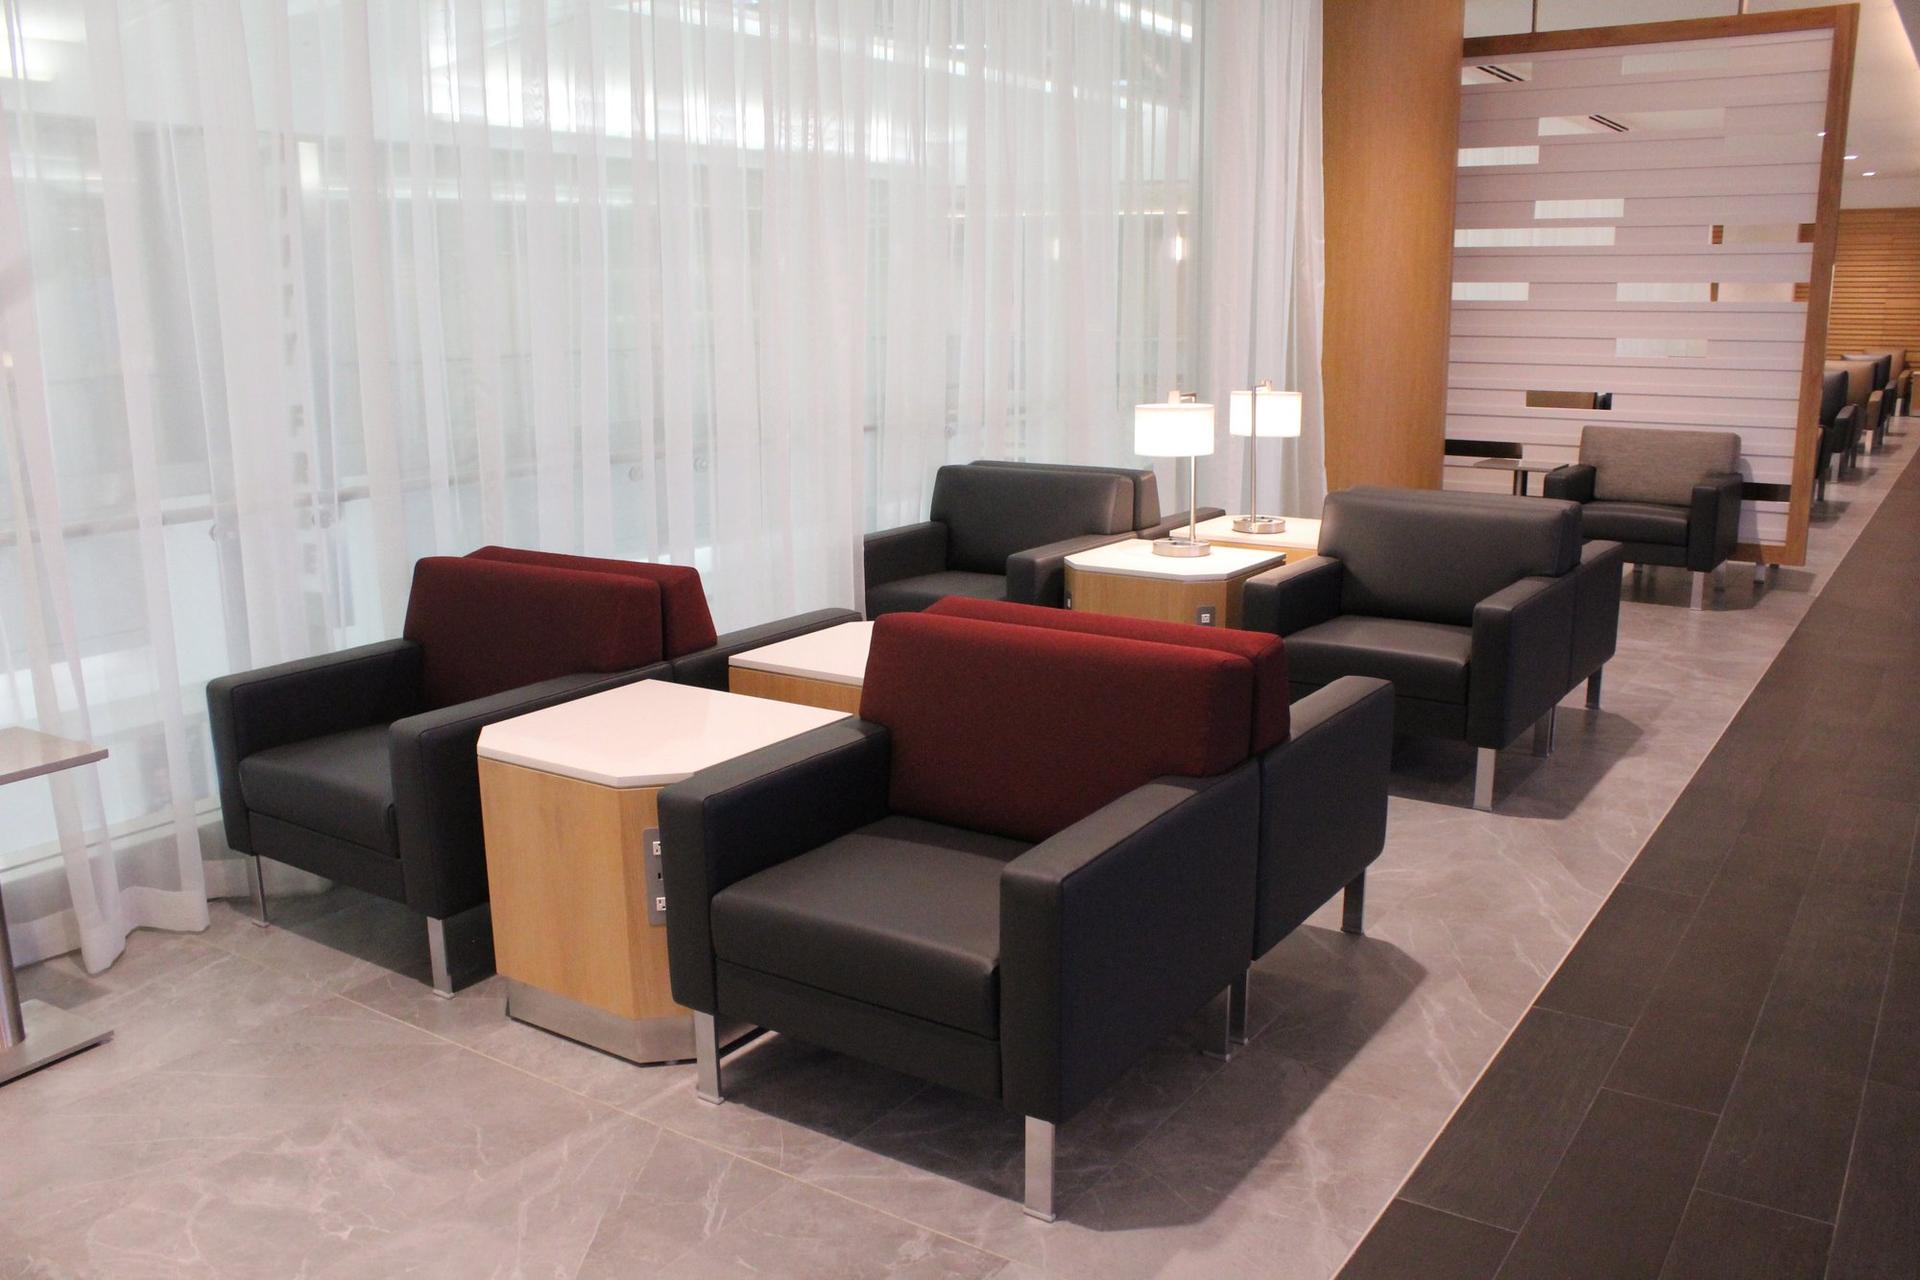 American Airlines Flagship Lounge image 1 of 65